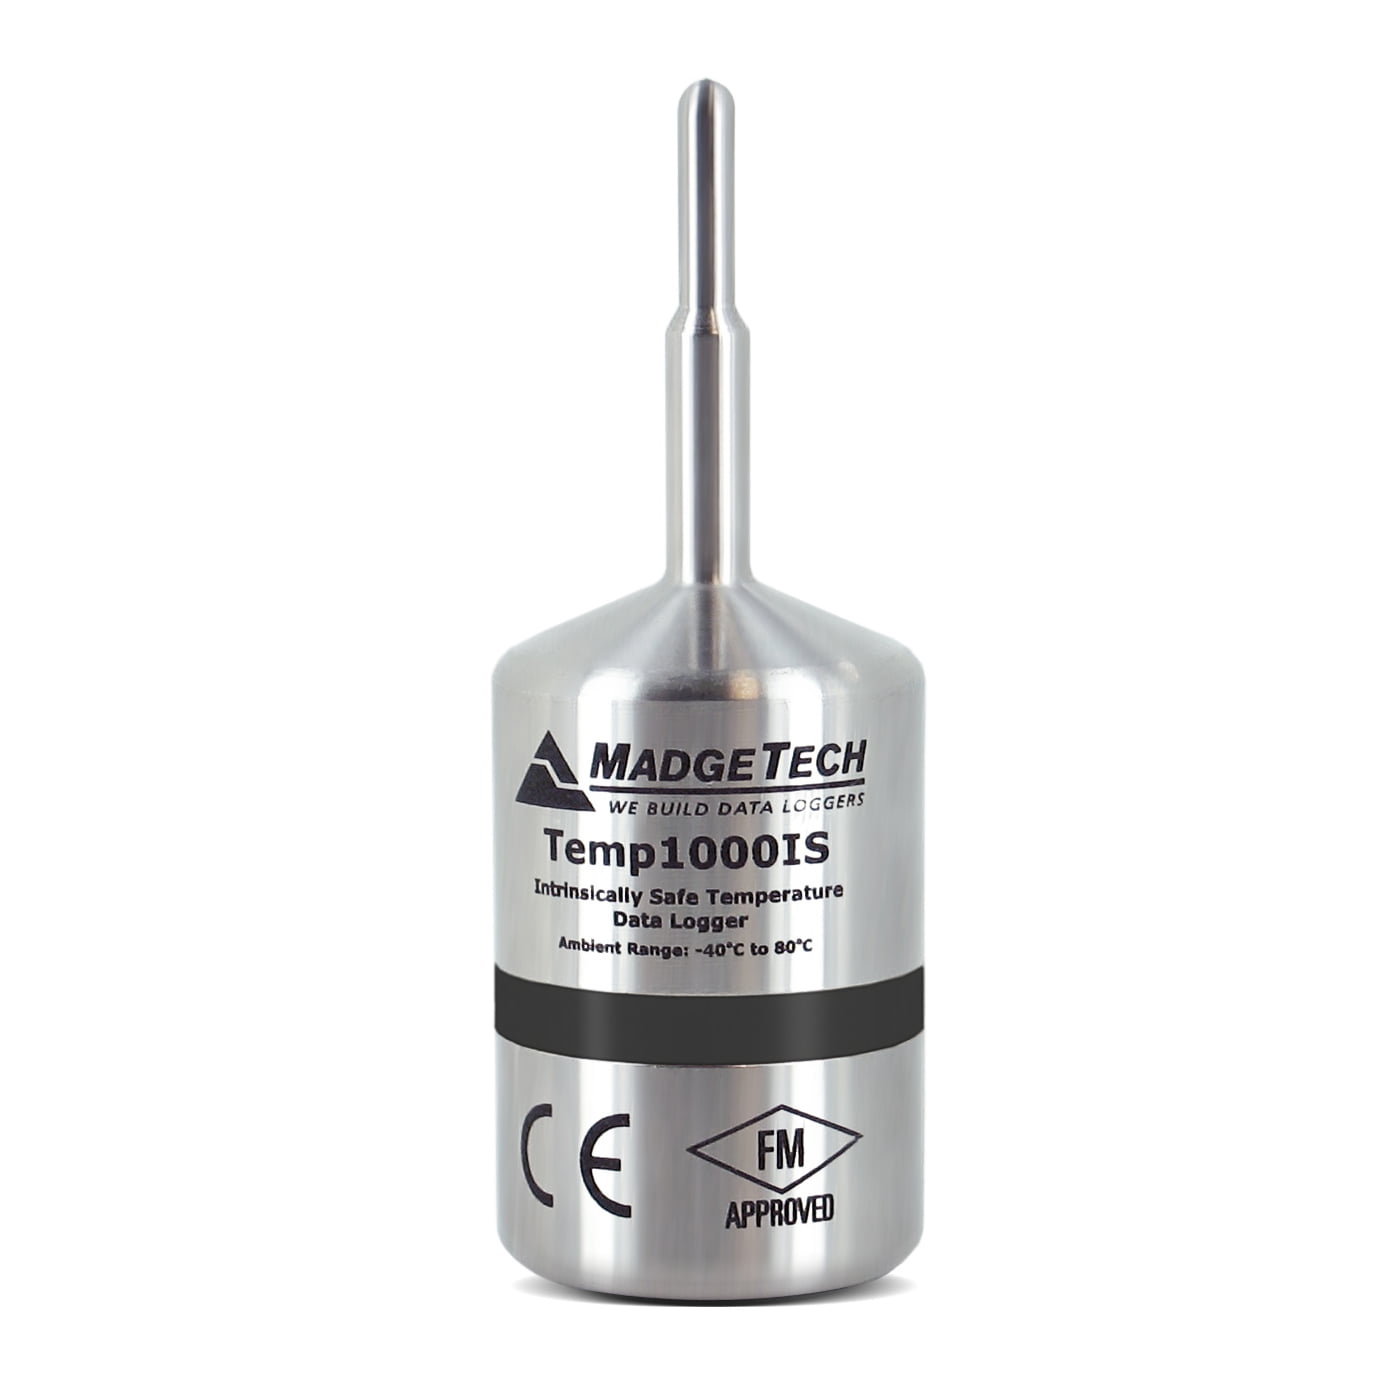 MadgeTech TEMP1000IS Temperature Data Logger - Intrinsically Safe Store